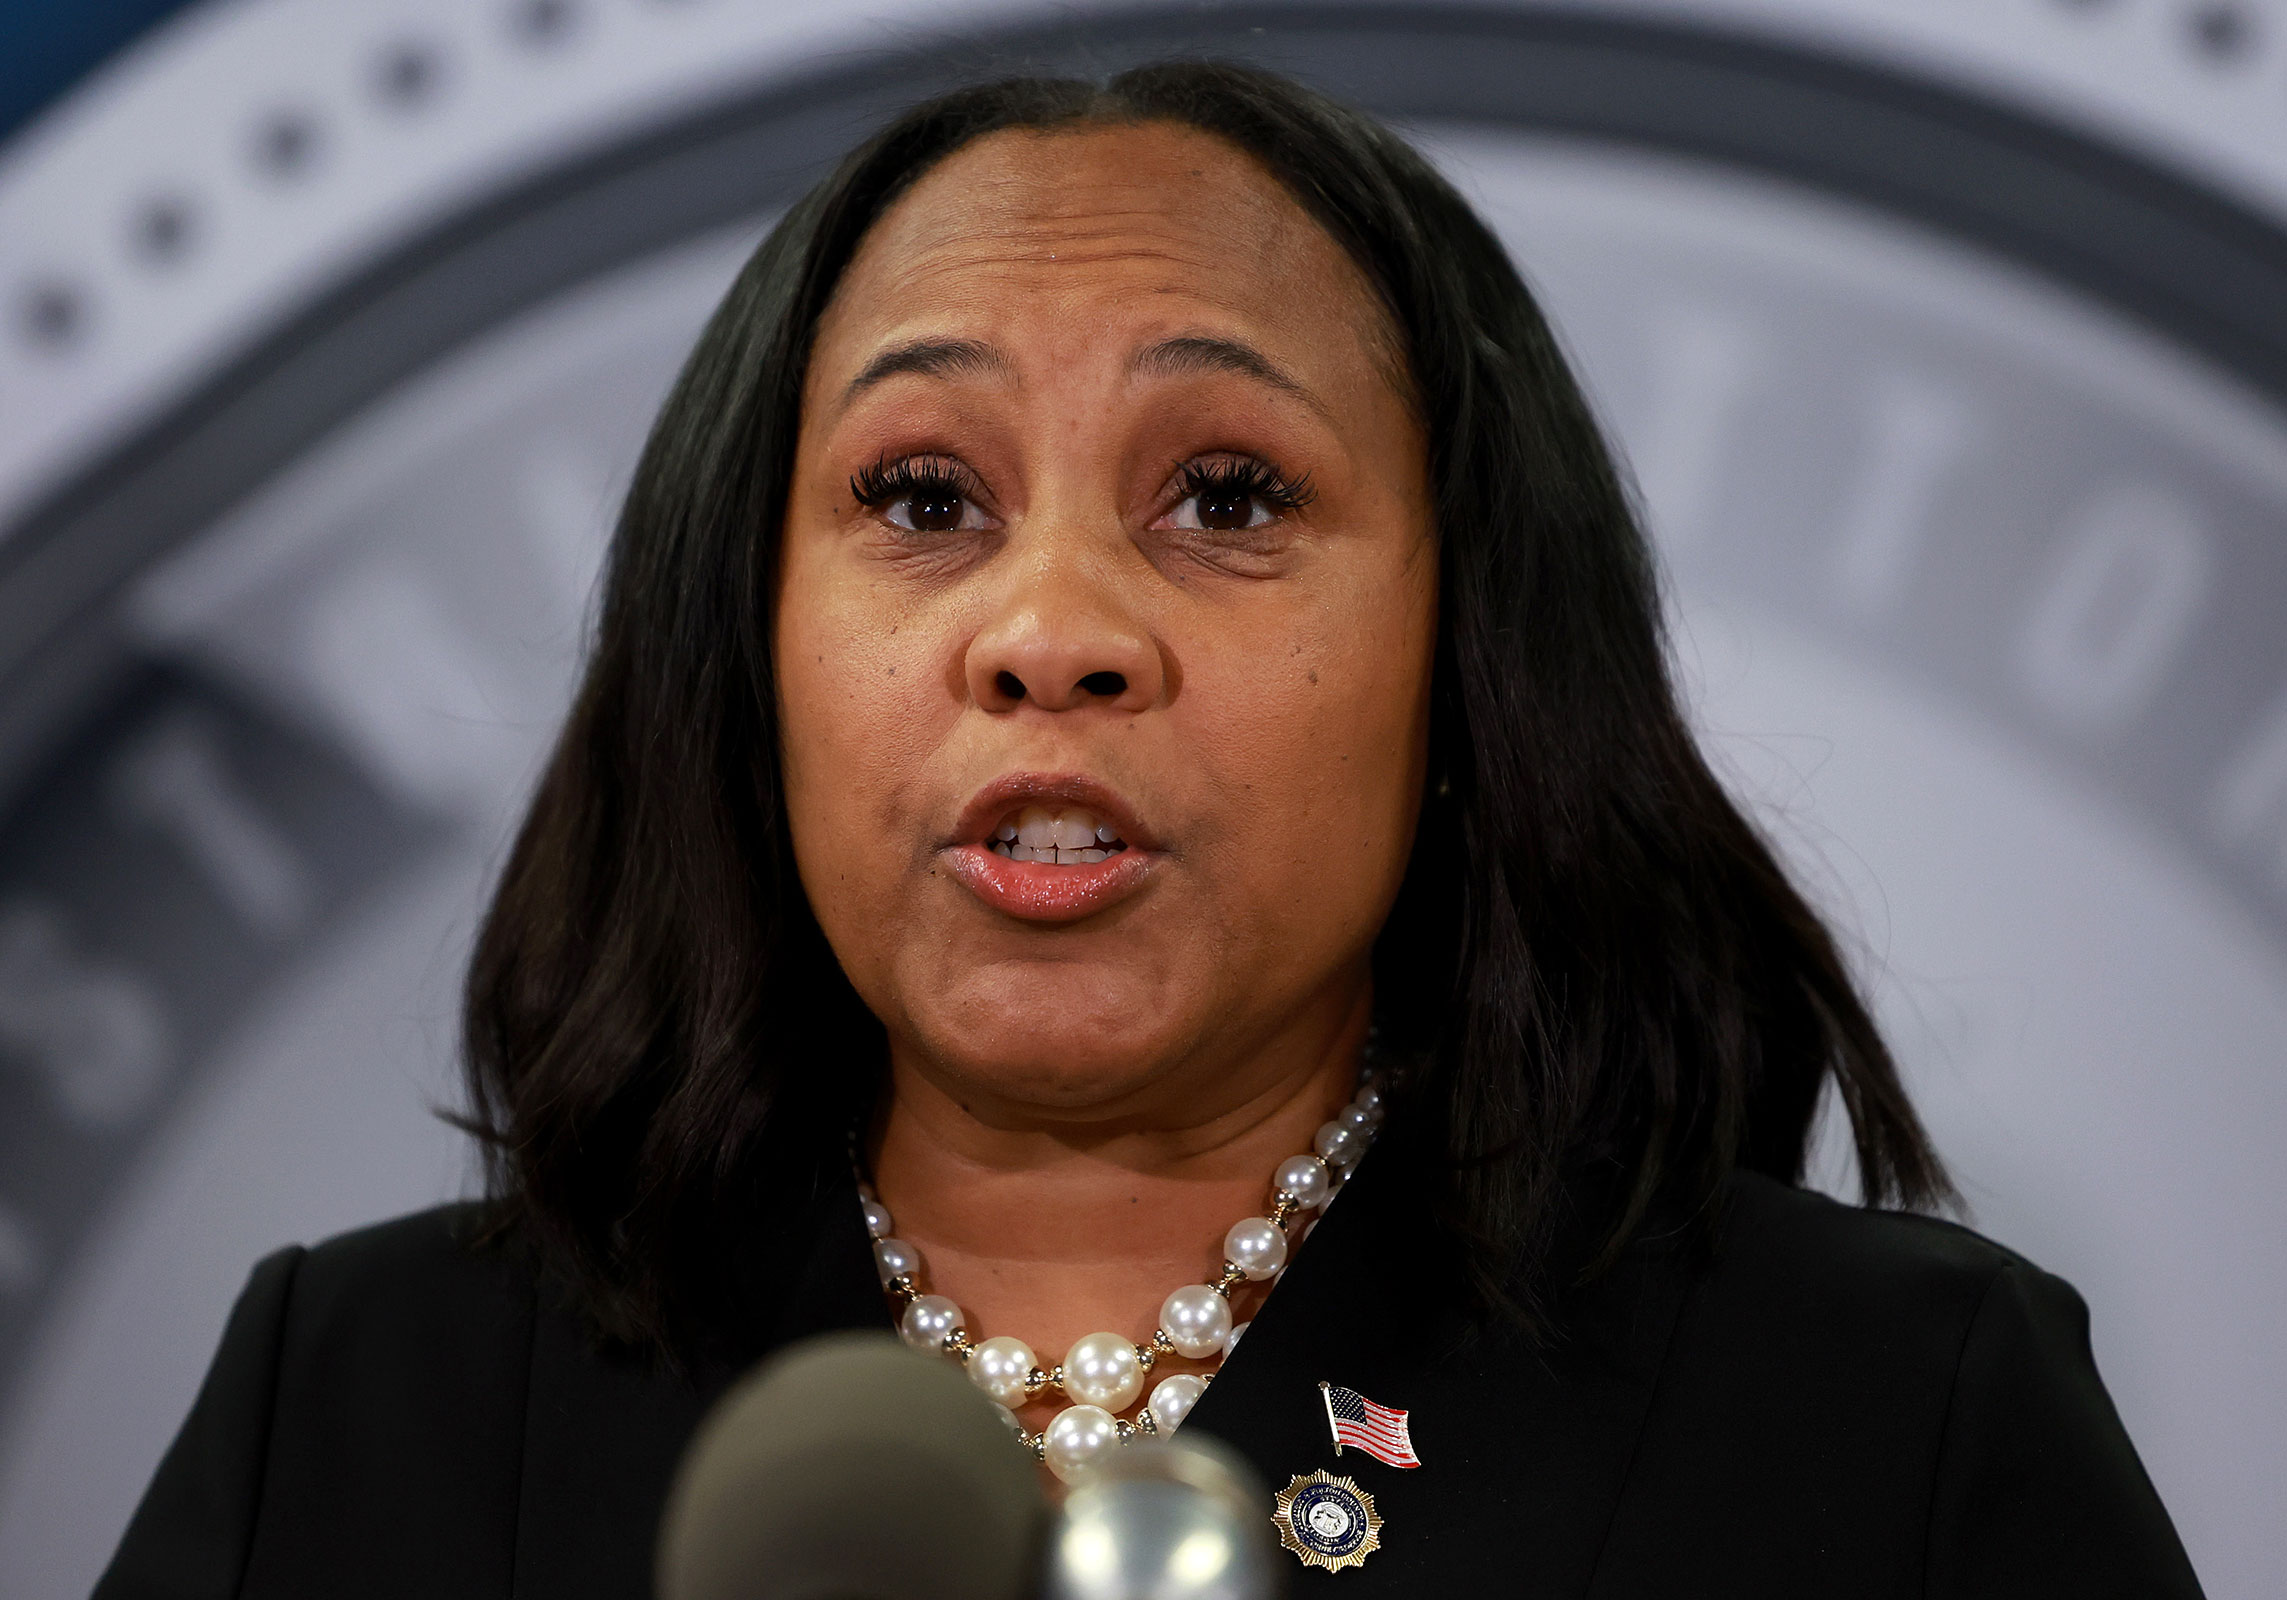 Fulton County District Attorney Fani Willis speaks during a news conference at the Fulton County Government building on August 14 in Atlanta, Georgia.